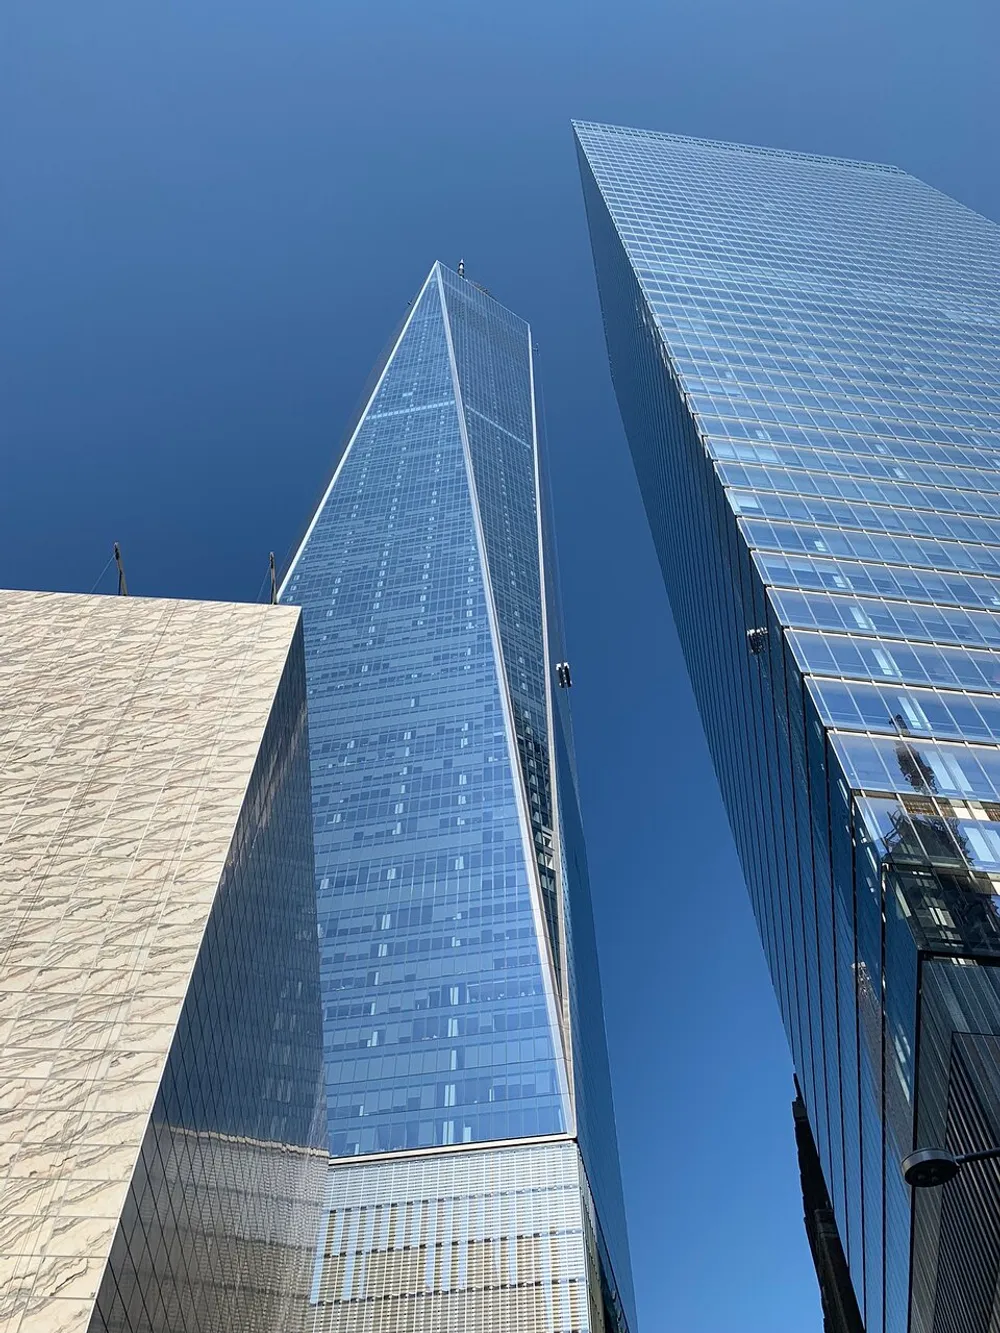 The image shows a worms-eye view of tall skyscrapers against a clear blue sky with one building reflecting the sky on its glass facade